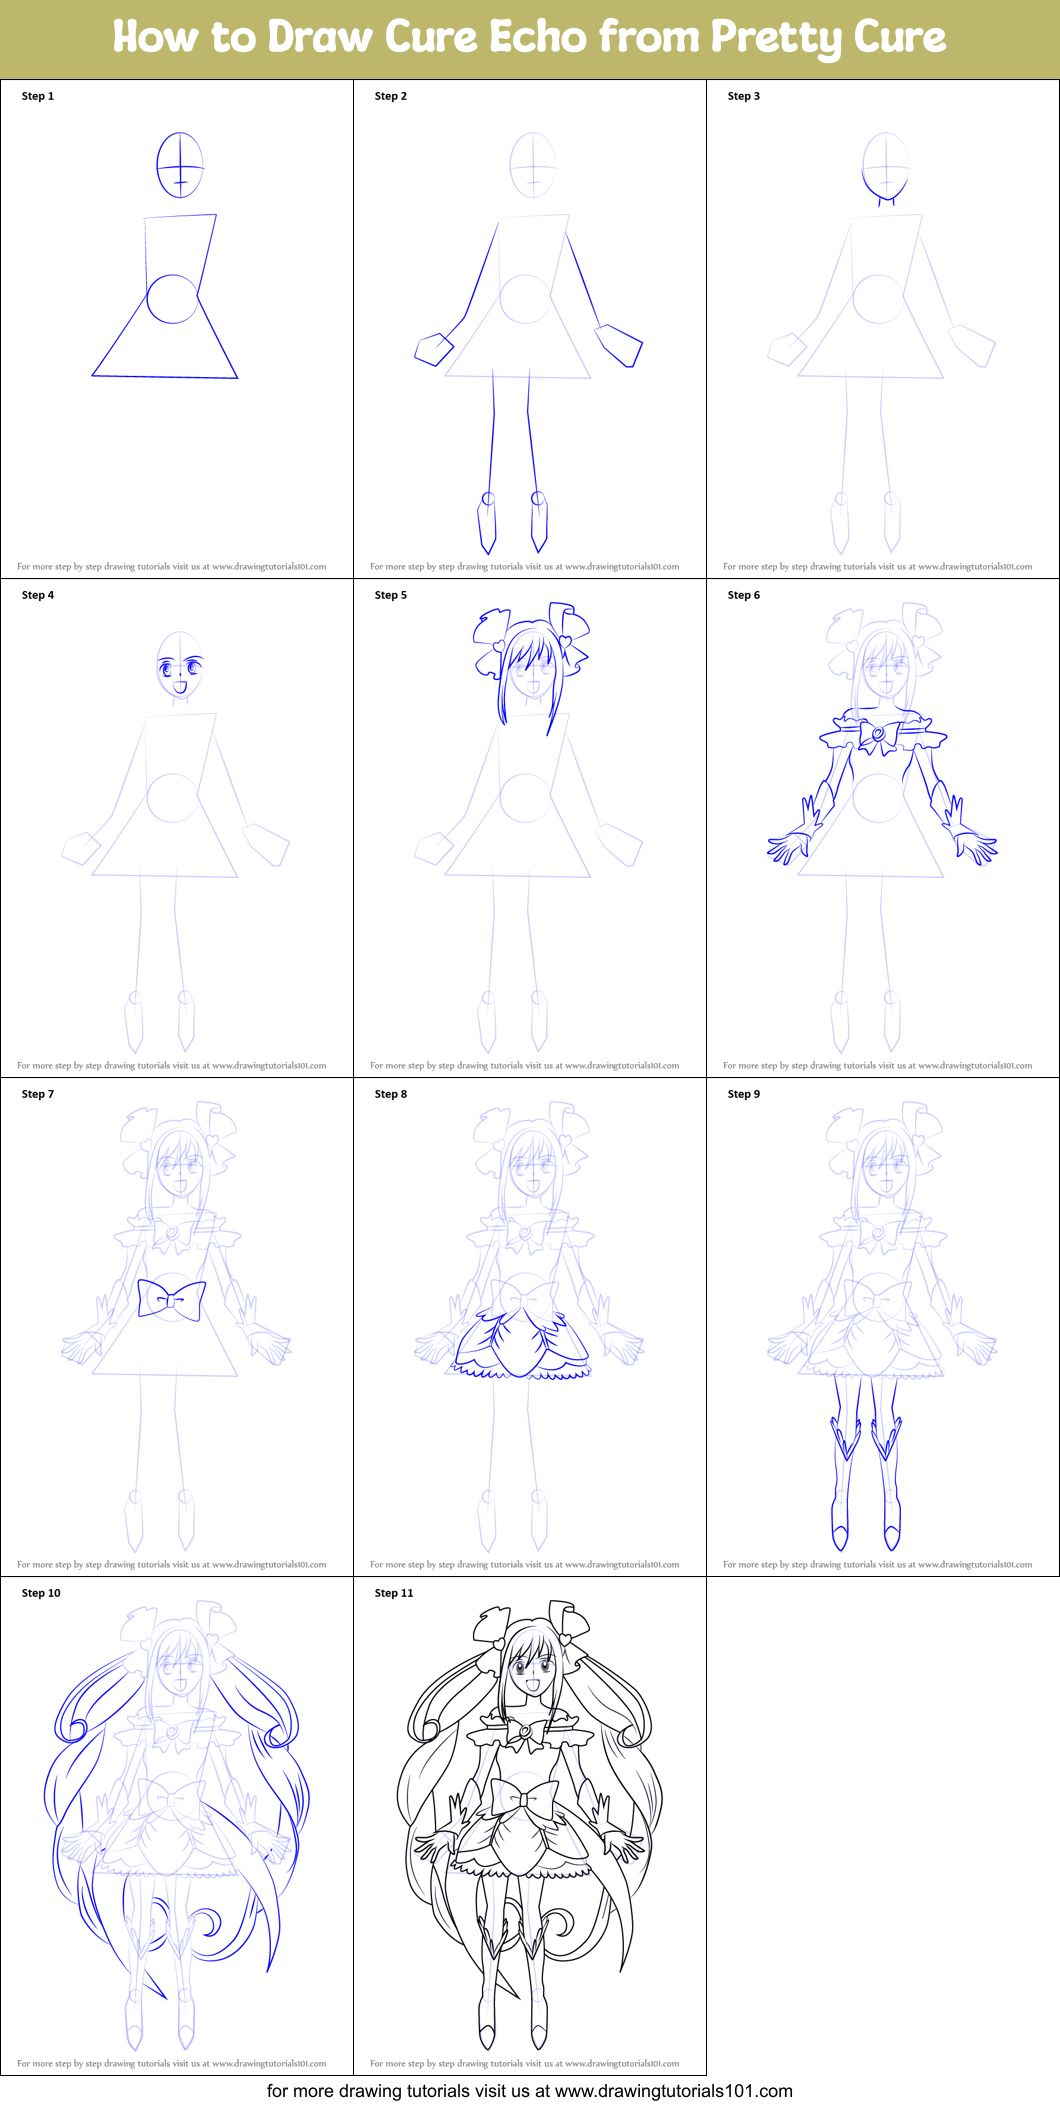 How to Draw Cure Echo from Pretty Cure (Pretty Cure) Step by Step